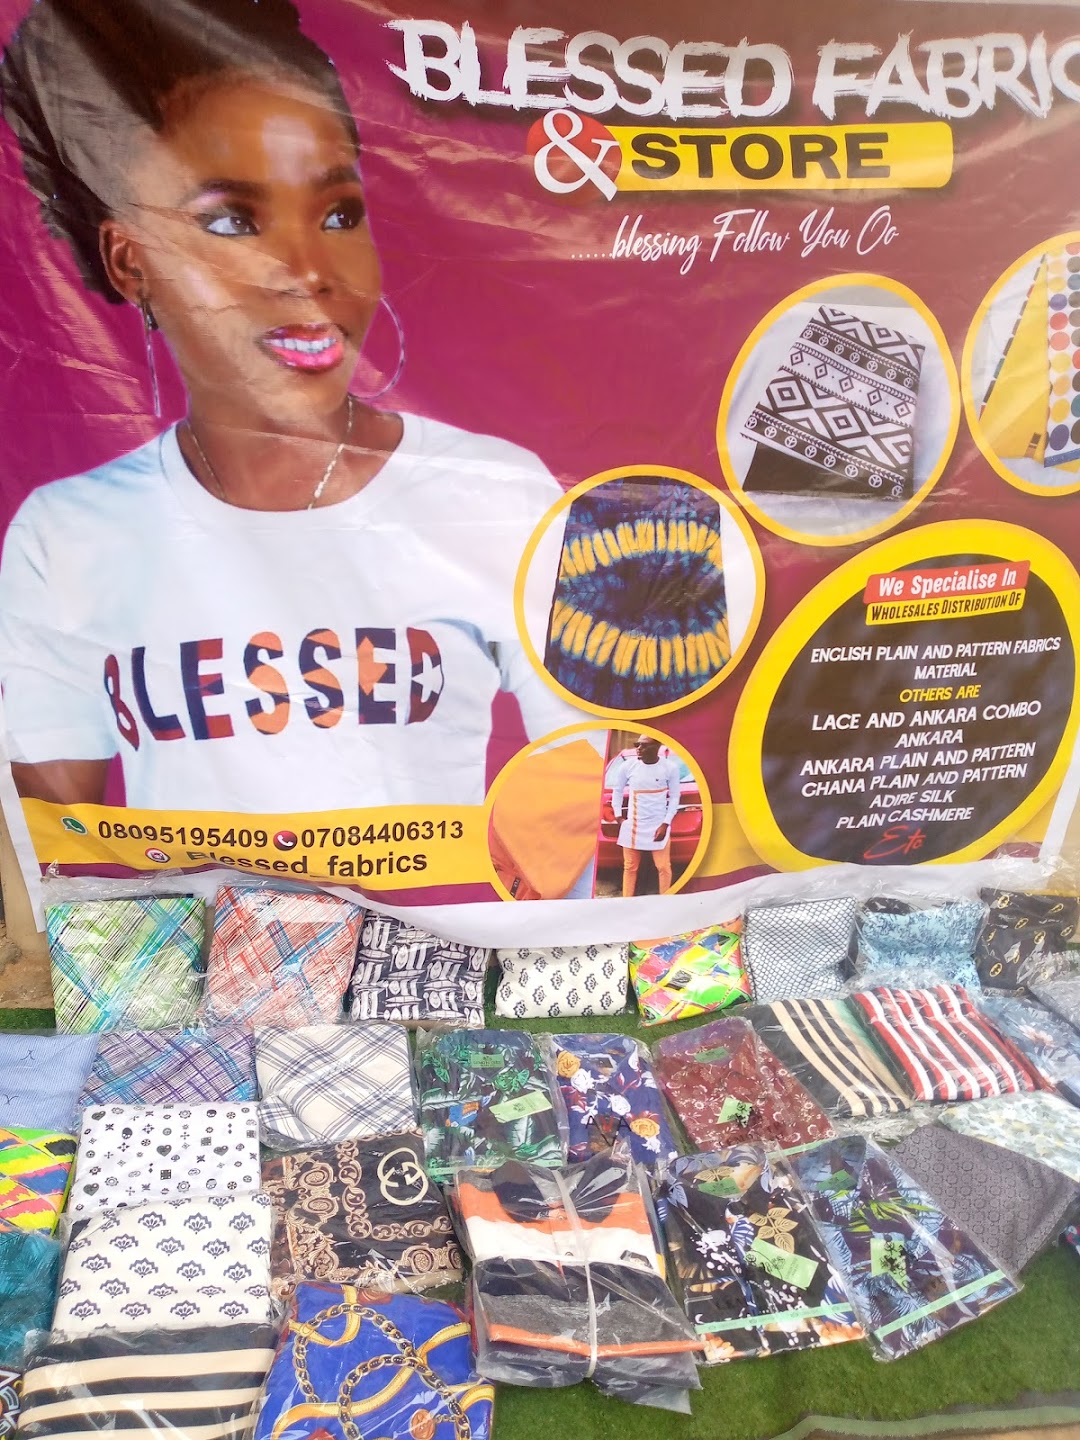 Blessed Fabrics And Store